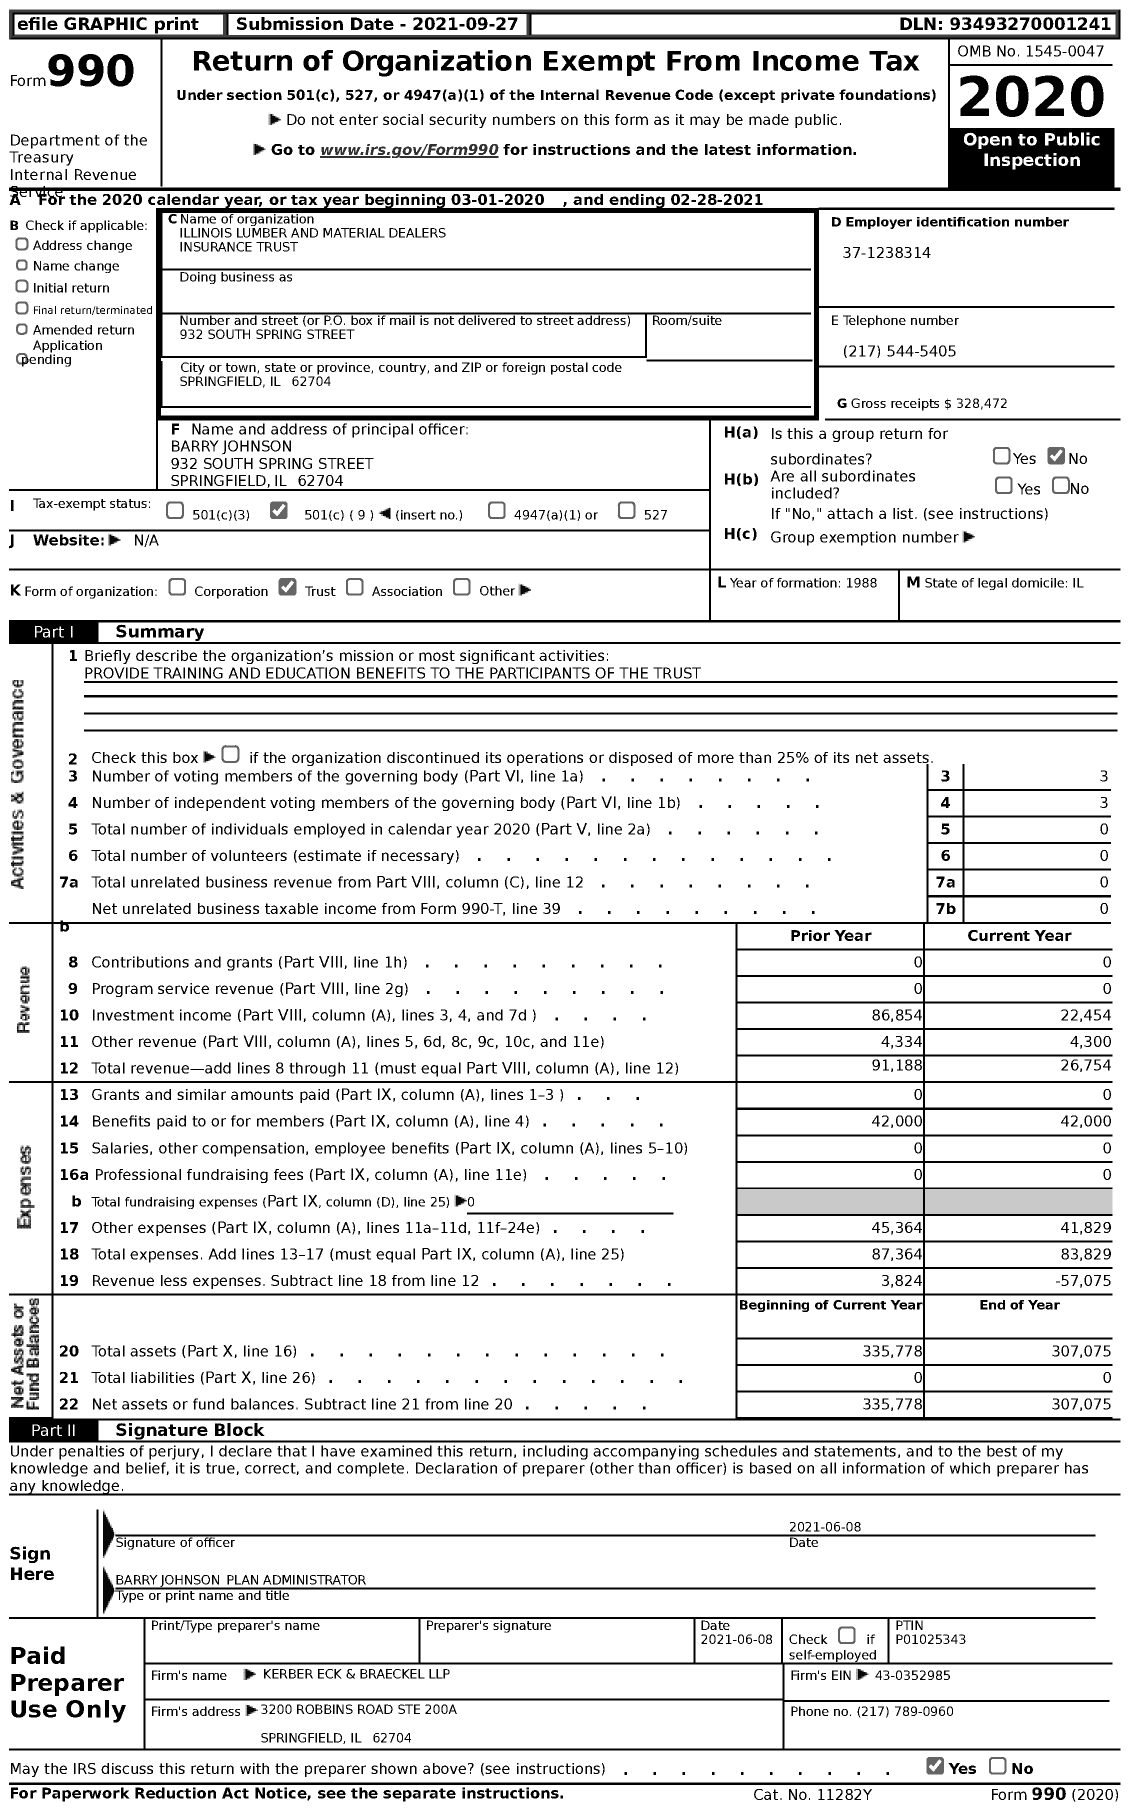 Image of first page of 2020 Form 990 for Illinois Lumber and Material Dealers Insurance Trust